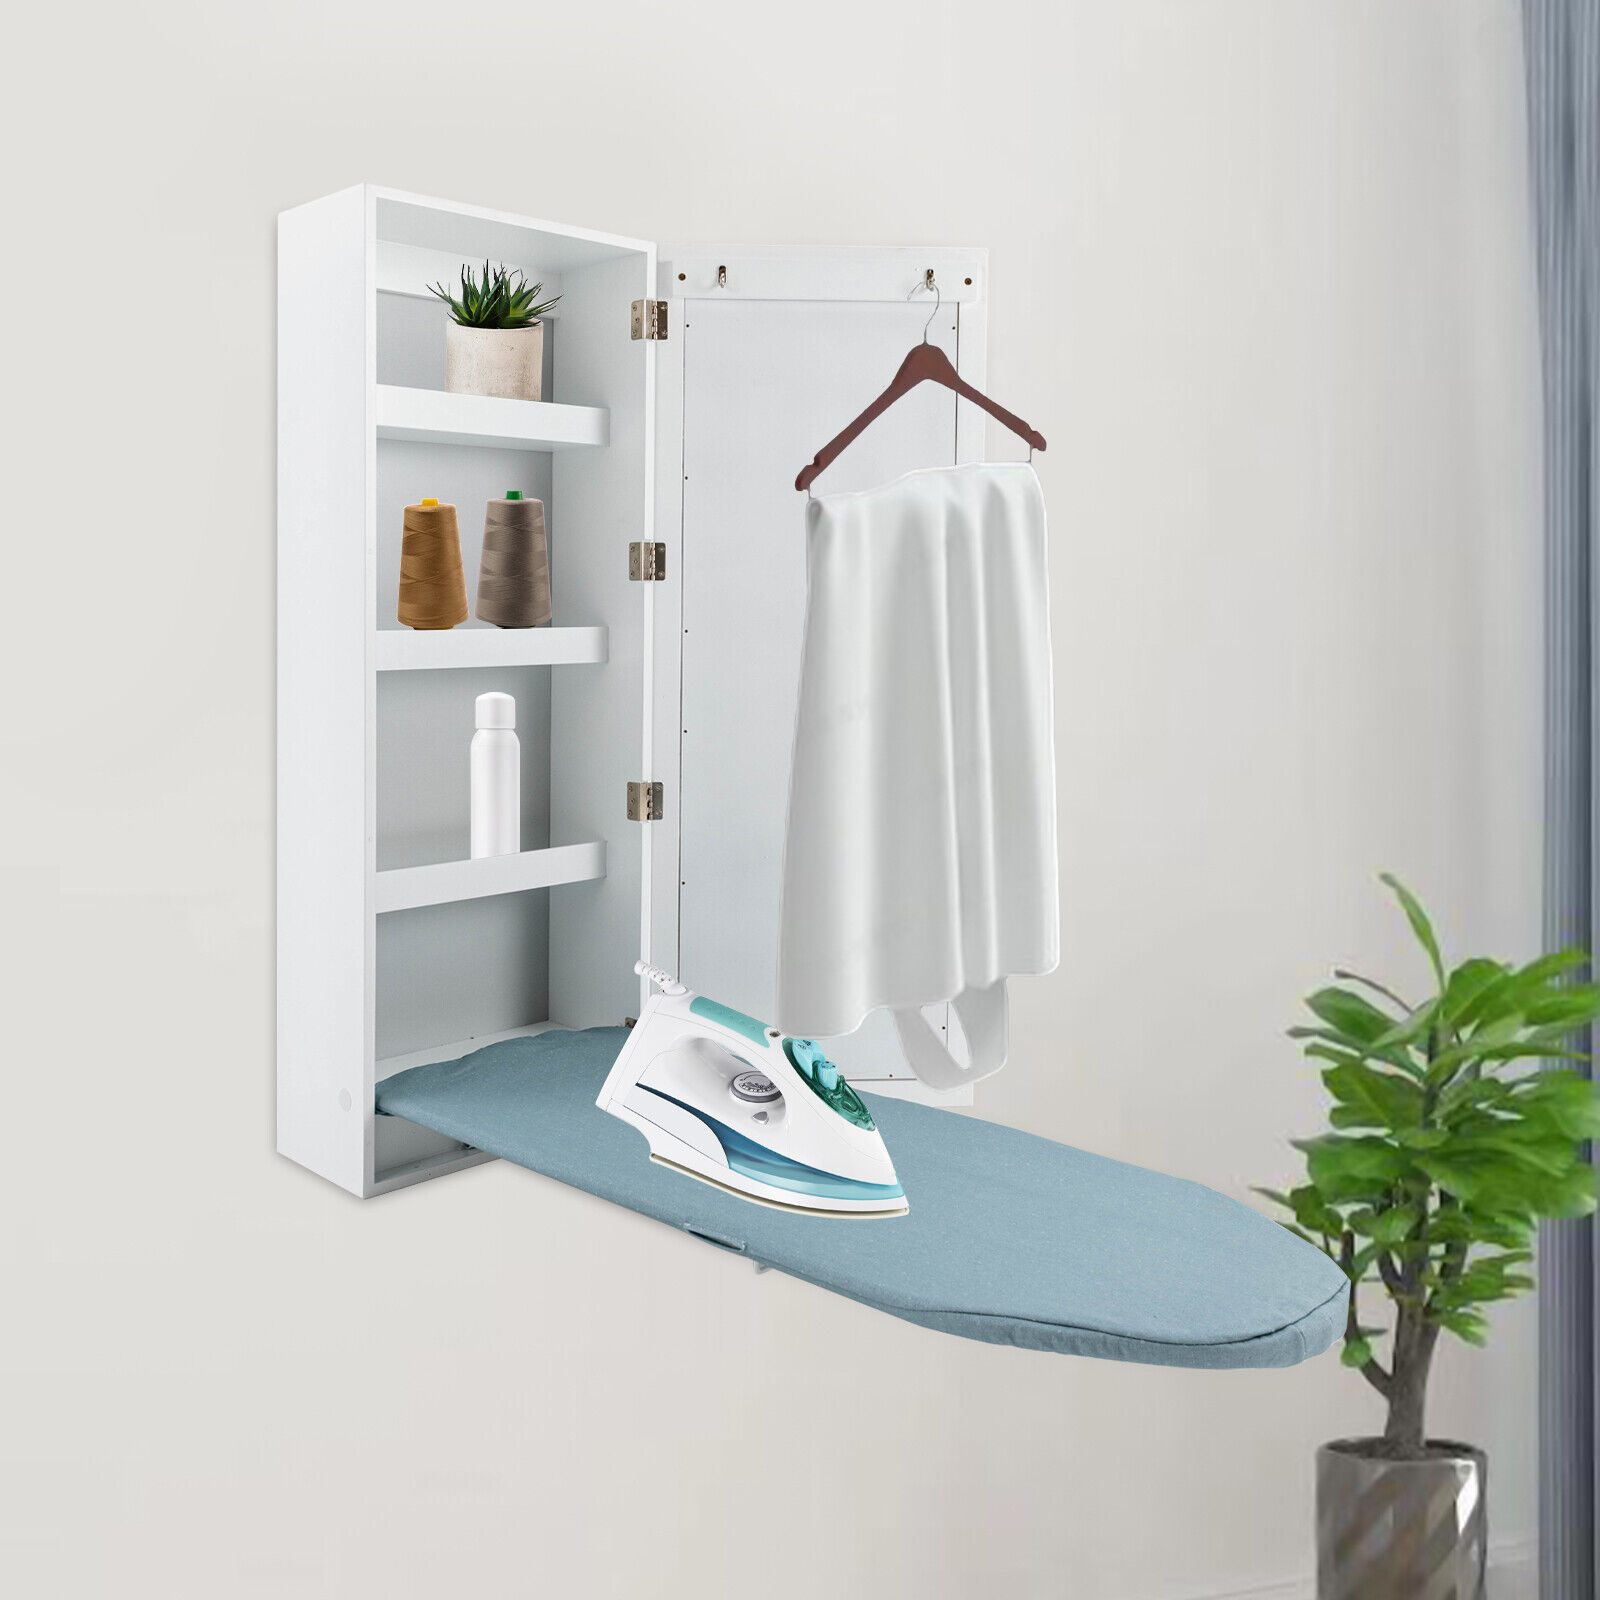 Ironing Board Cabinet Wall Mounted Built in Ironing Board Cabinet With Mirror